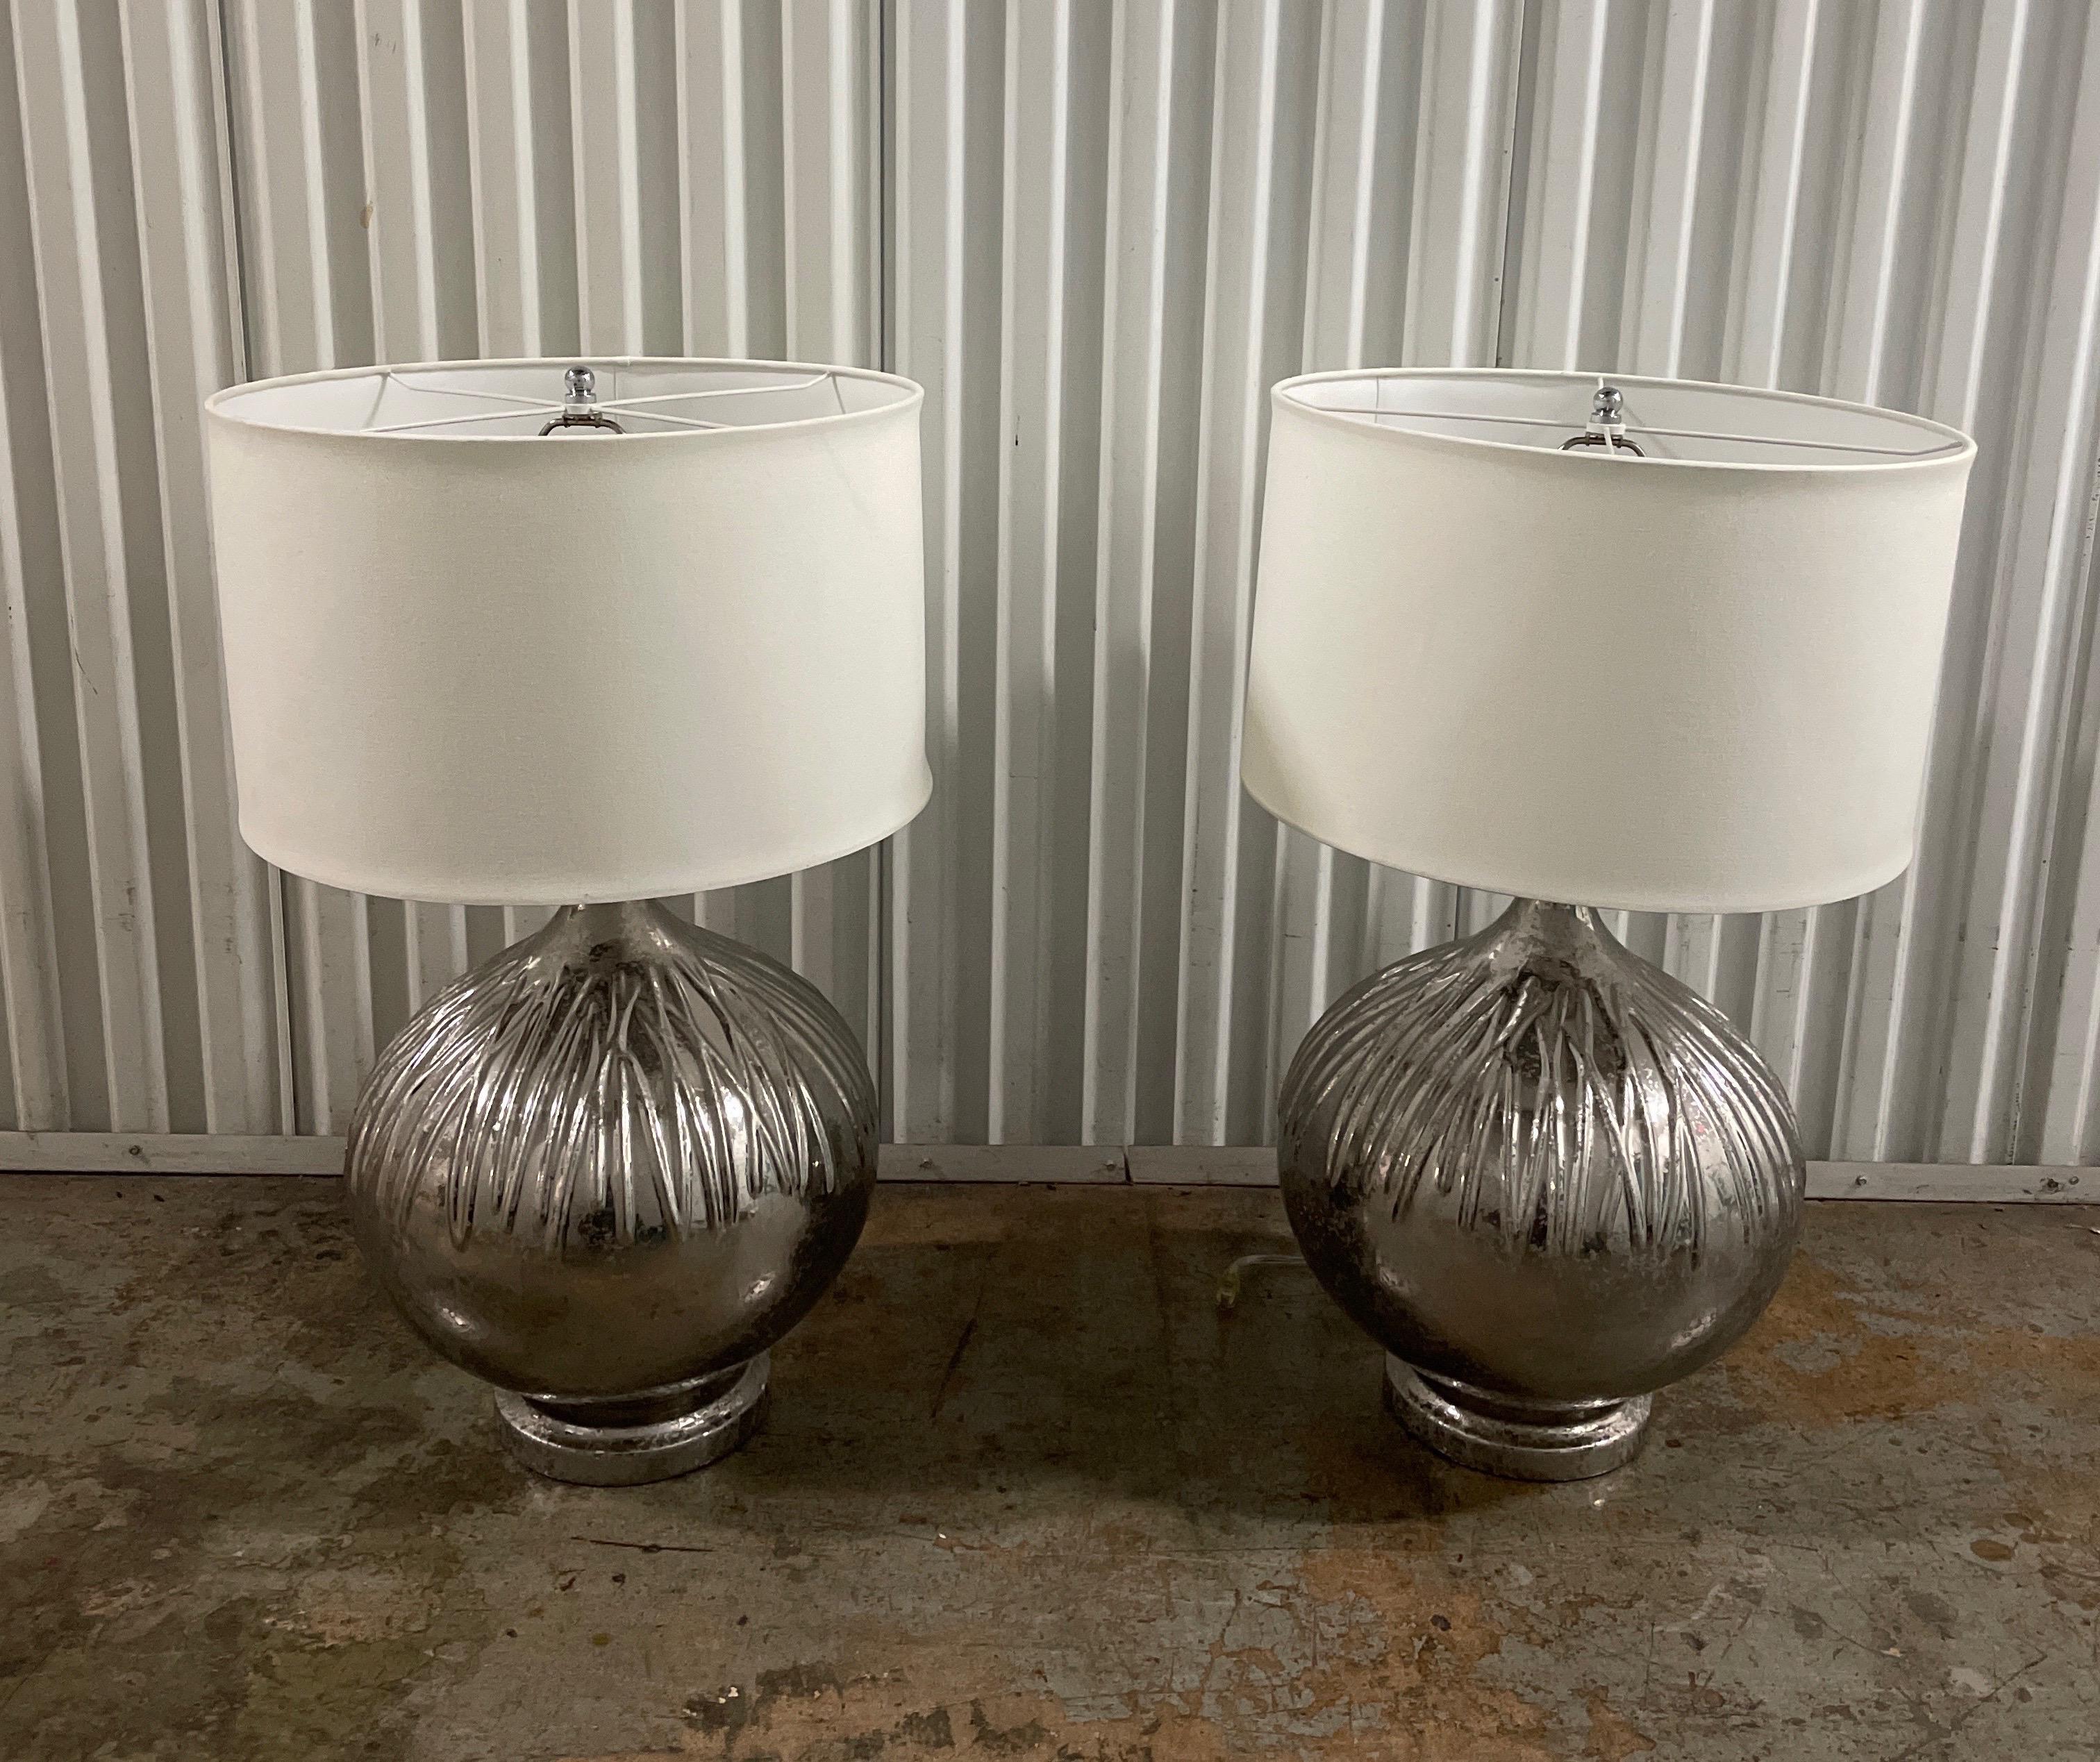 Pair of large scale round organic mercury glass type lamps. Shades are 11